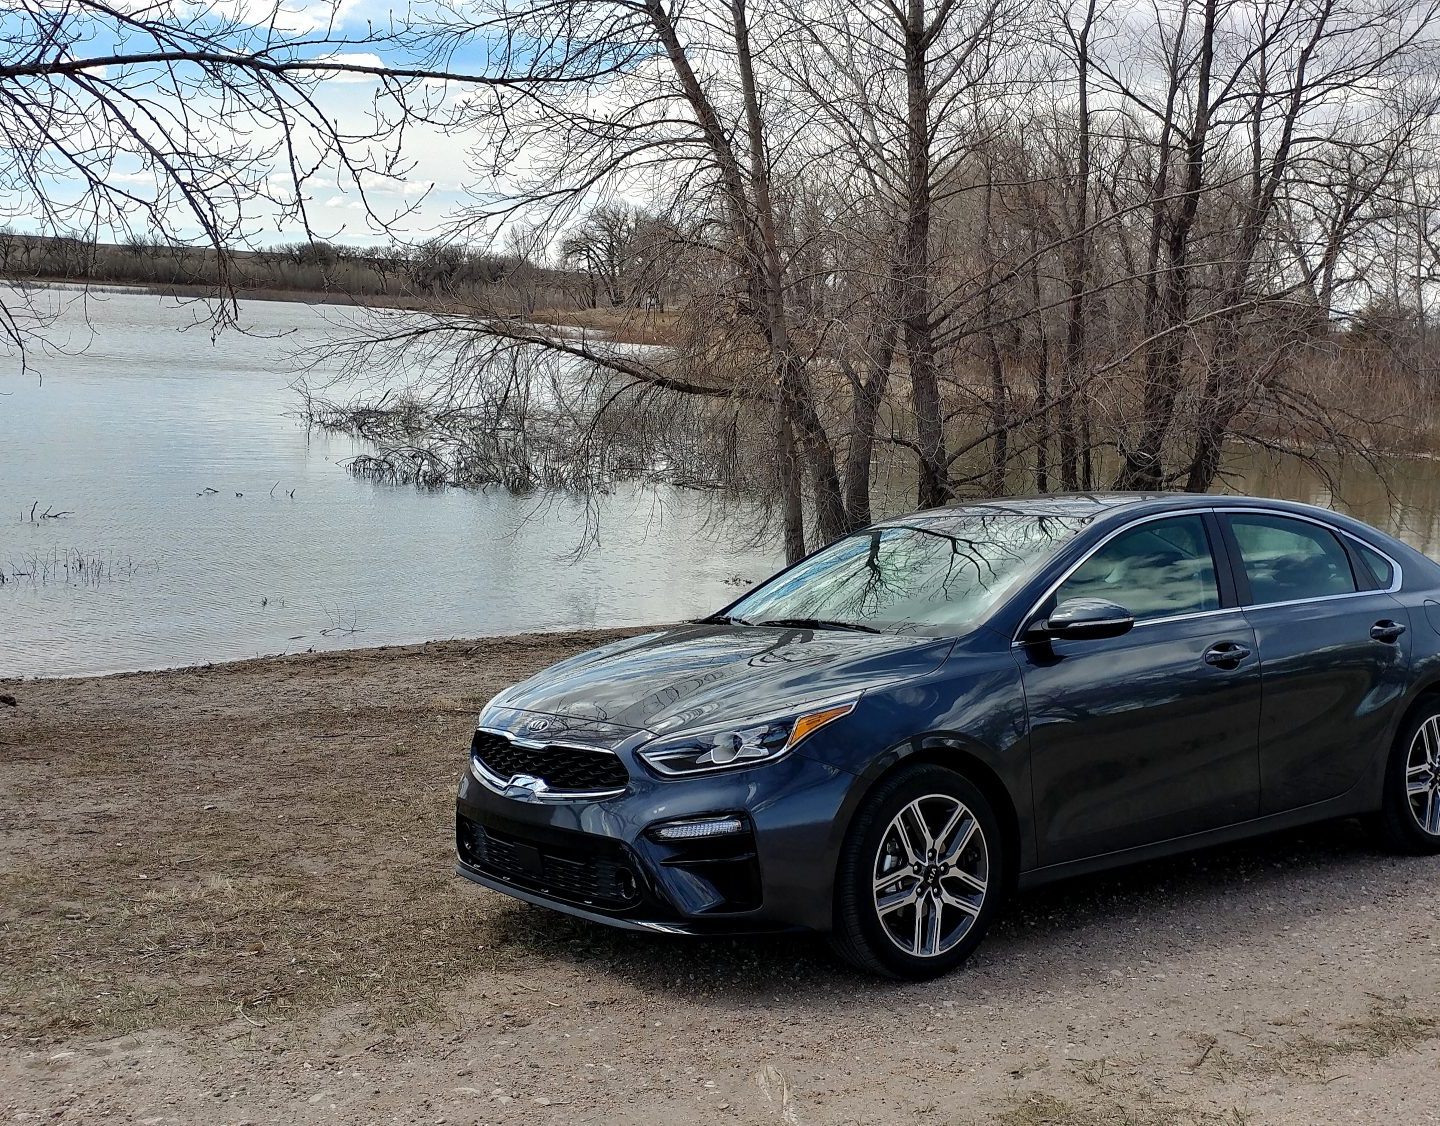 2019 Kia Forte is an Excellent Entry Car